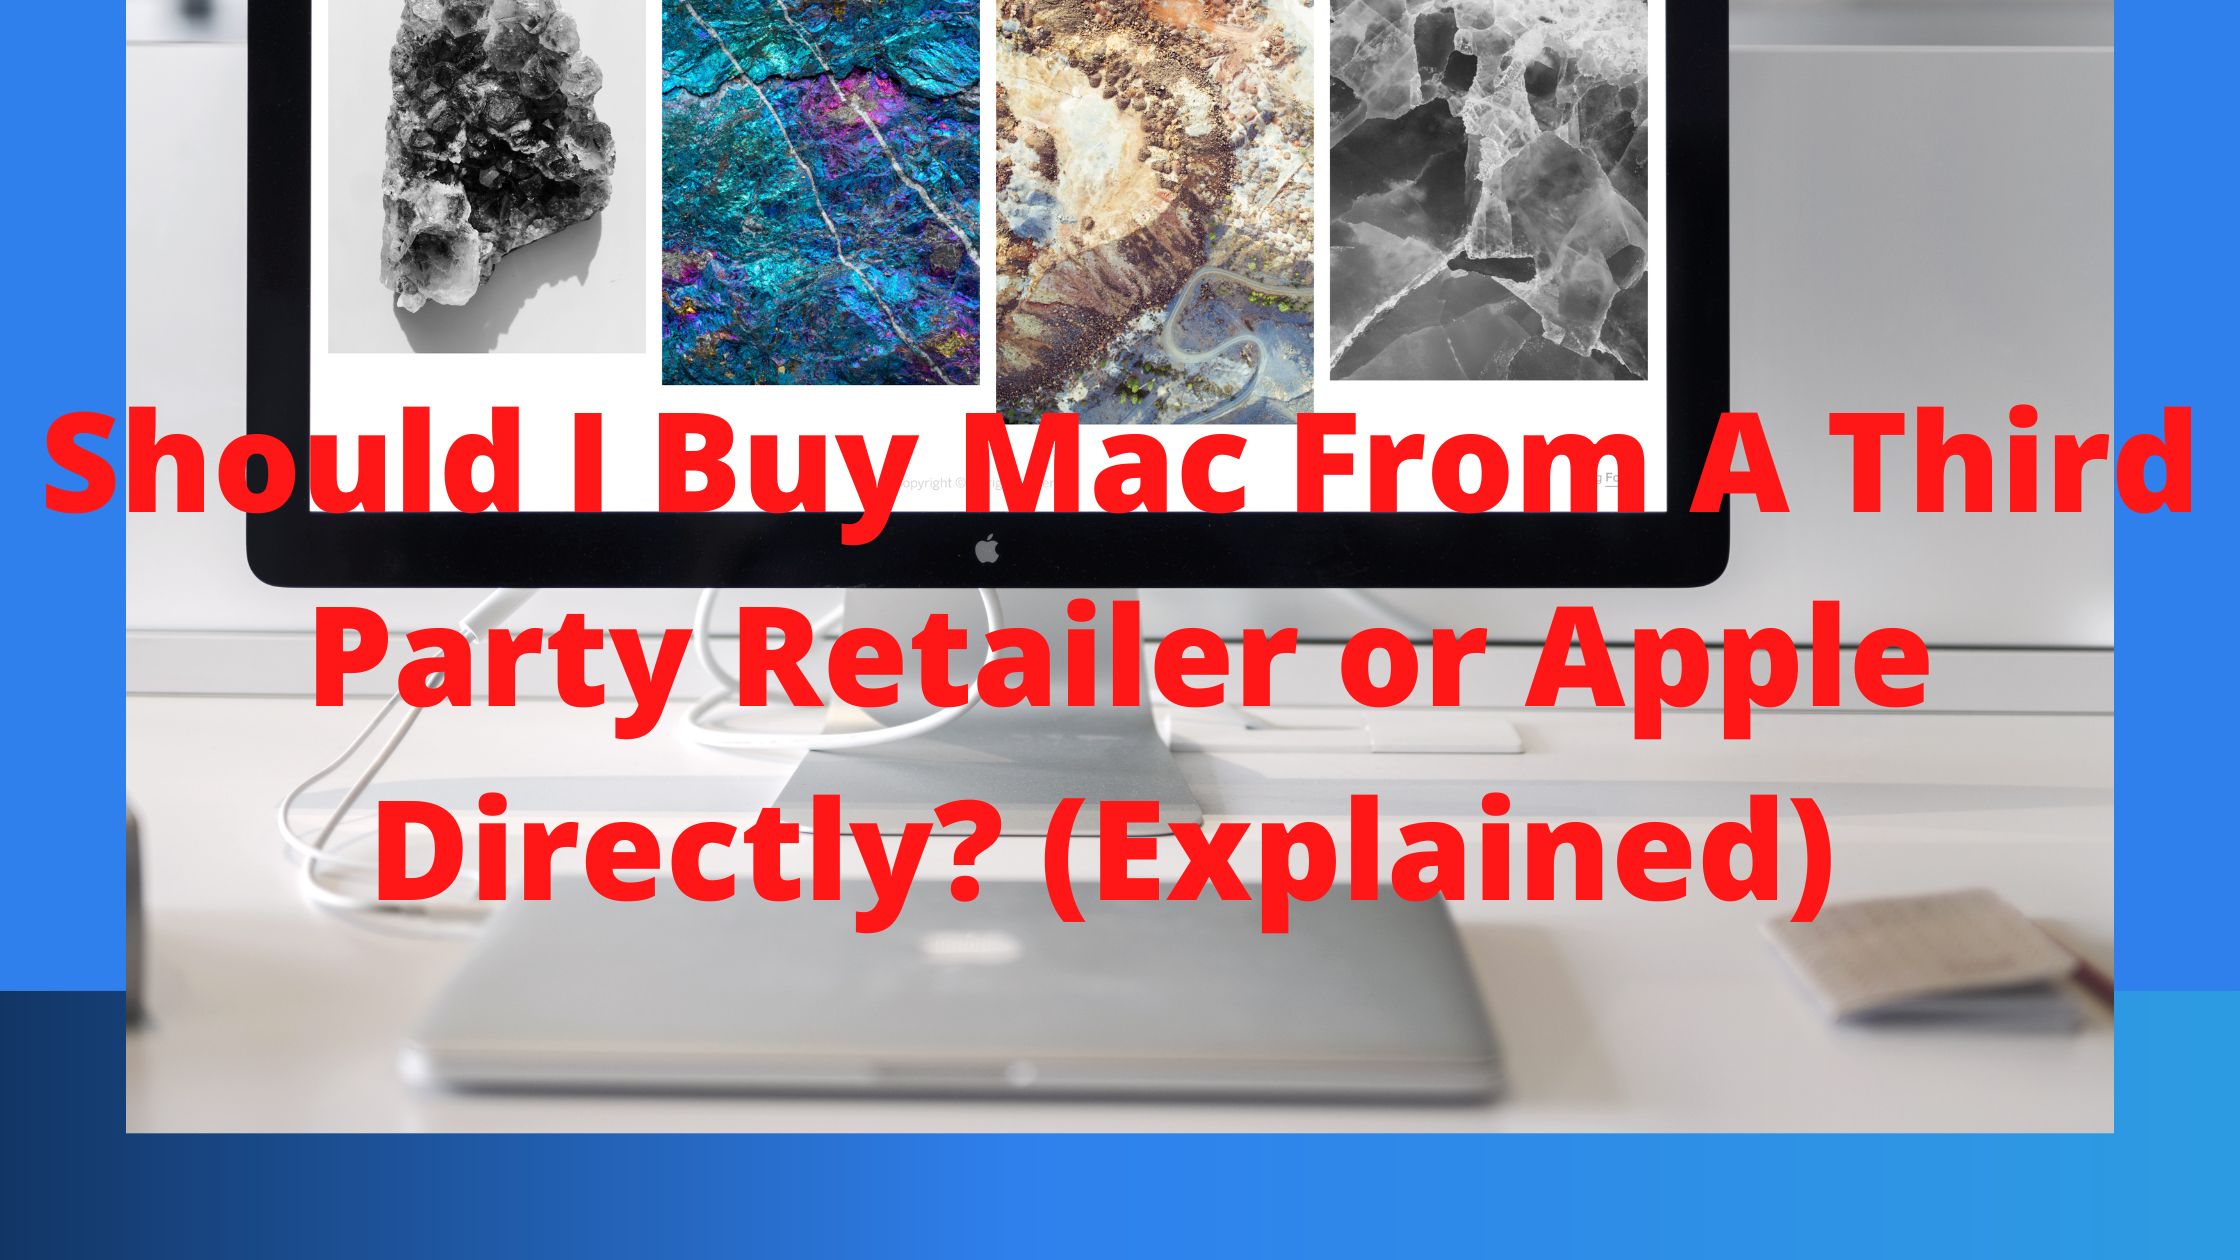 Should I Buy Mac From A Third Party Retailer or Apple Directly? (Explained)